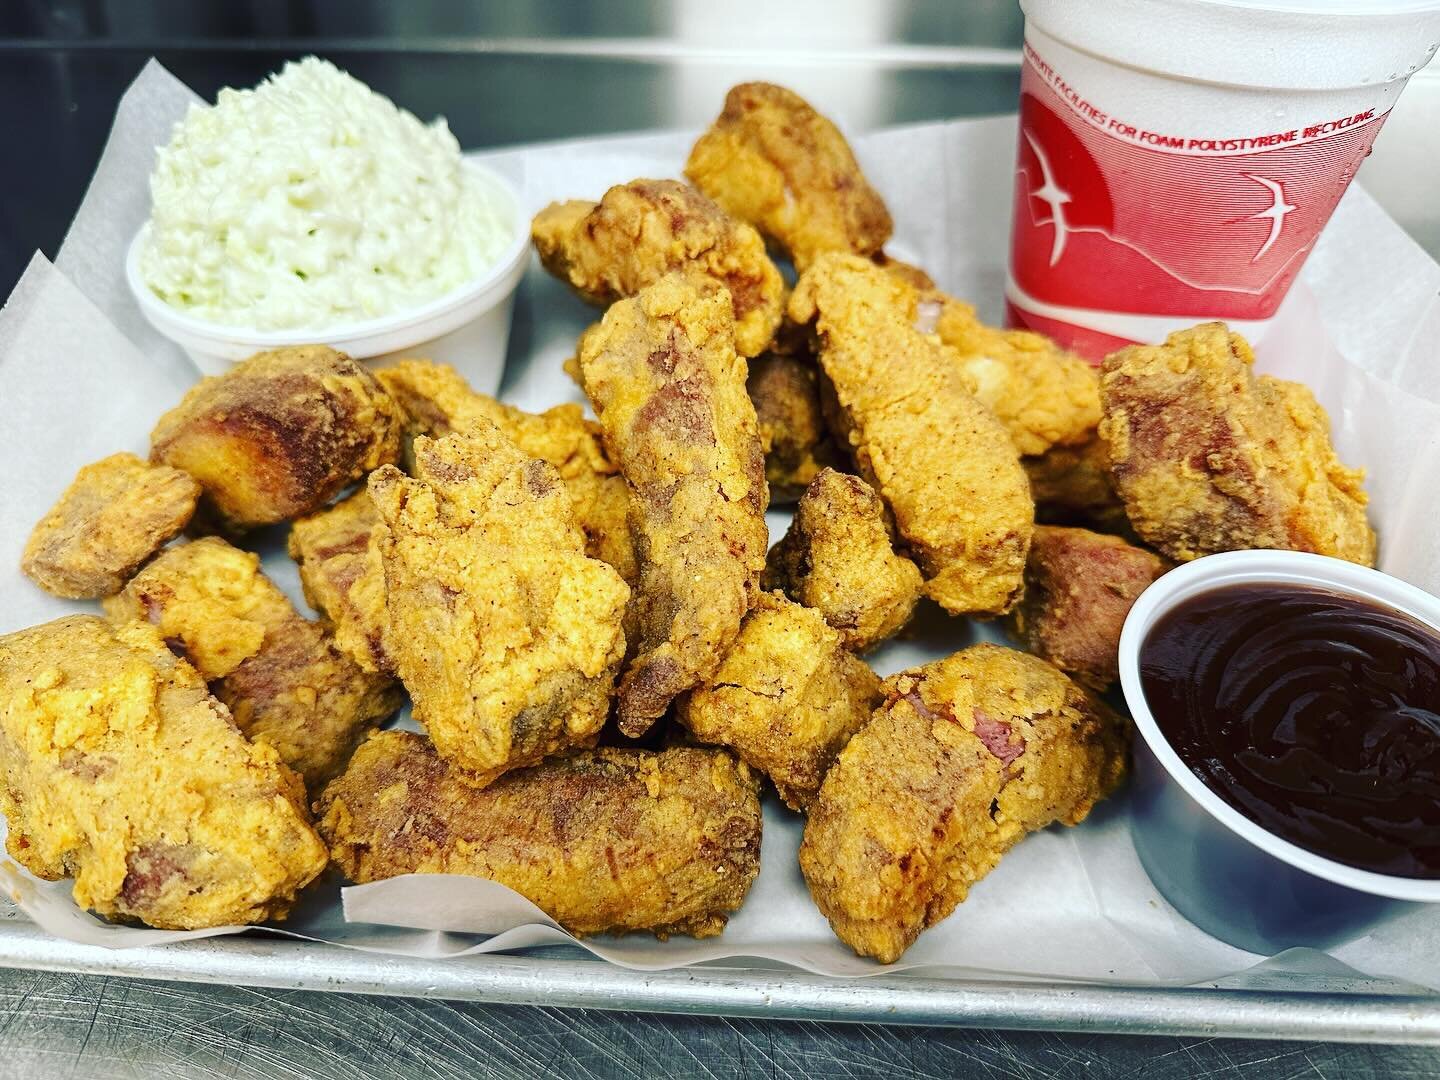 WE&rsquo;VE COOKED UP SOMETHING GREAT FOR OUR OCTOBER SPECIAL!!!

Introducing our Chicken Fried Rib Bits w/ Coleslaw!
1/2 pound of our chicken fried rib bits, small coleslaw, BBQ dipping sauce served with a 16 OZ. Fountain Pop

$12.99

For Full Menu,